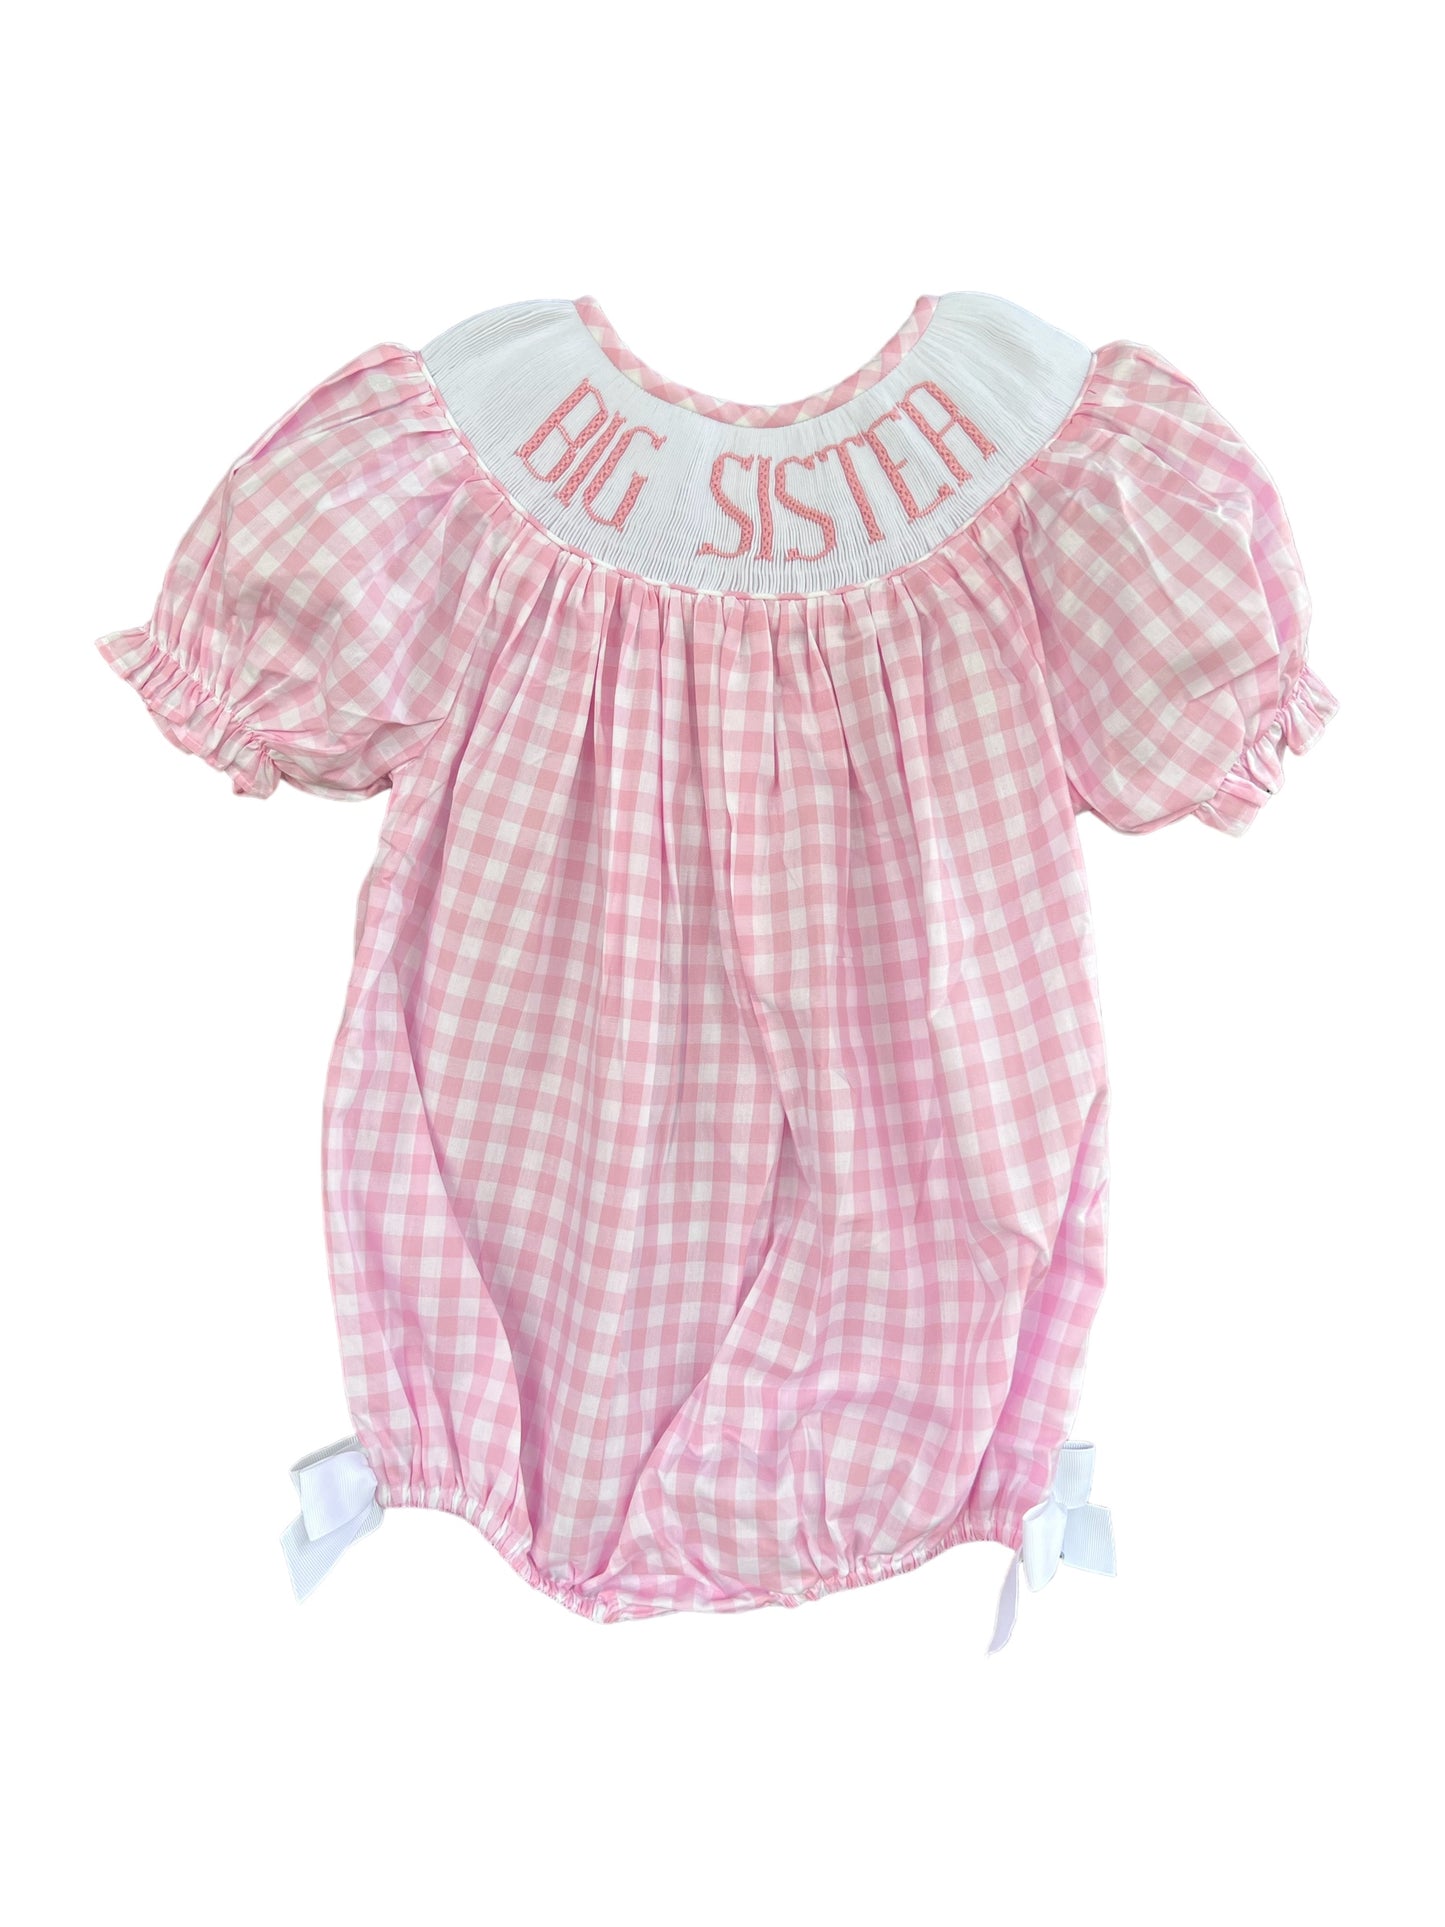 Big Sister Bubble Pink Gingham